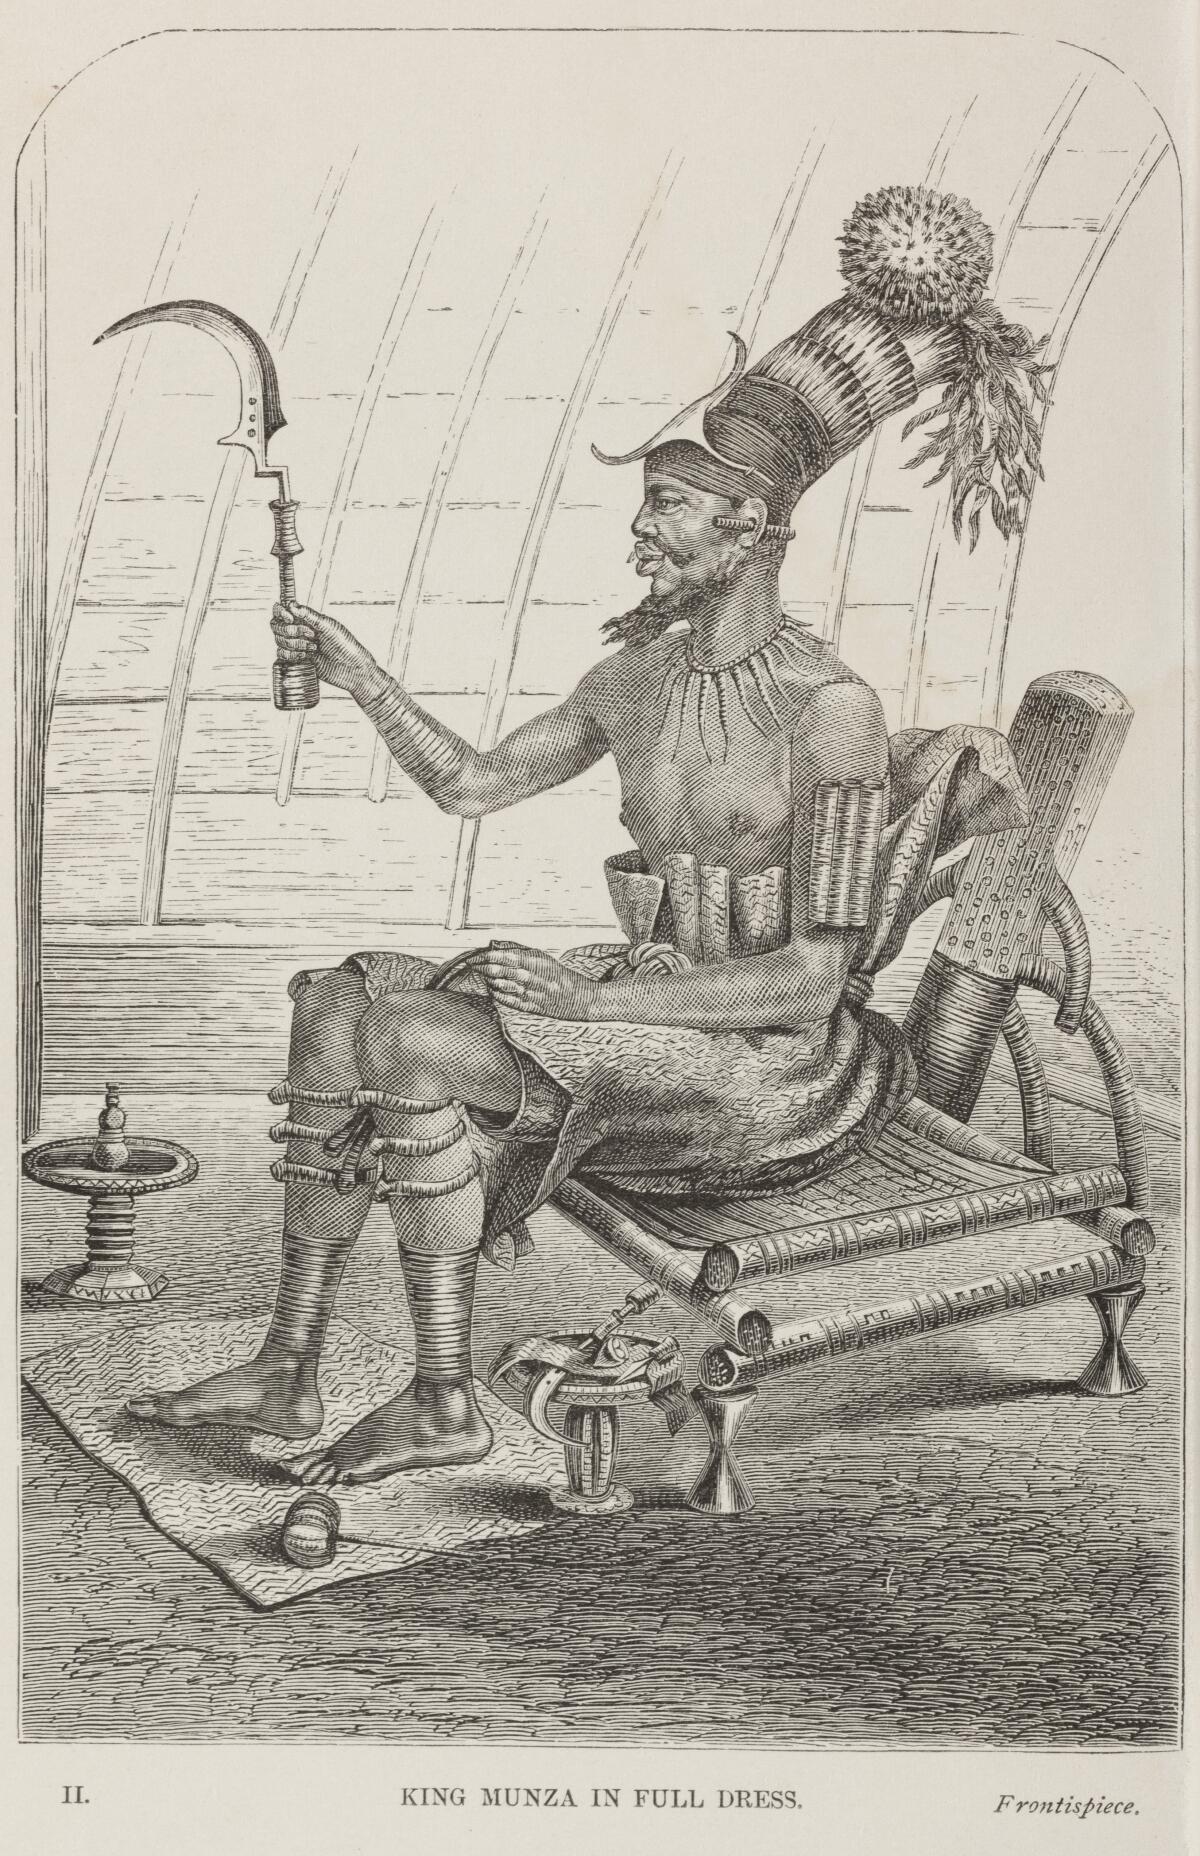 A 19th century engraving shows a regal African king of the Mangbetu ethnicity wielding a scepter while perched on a throne